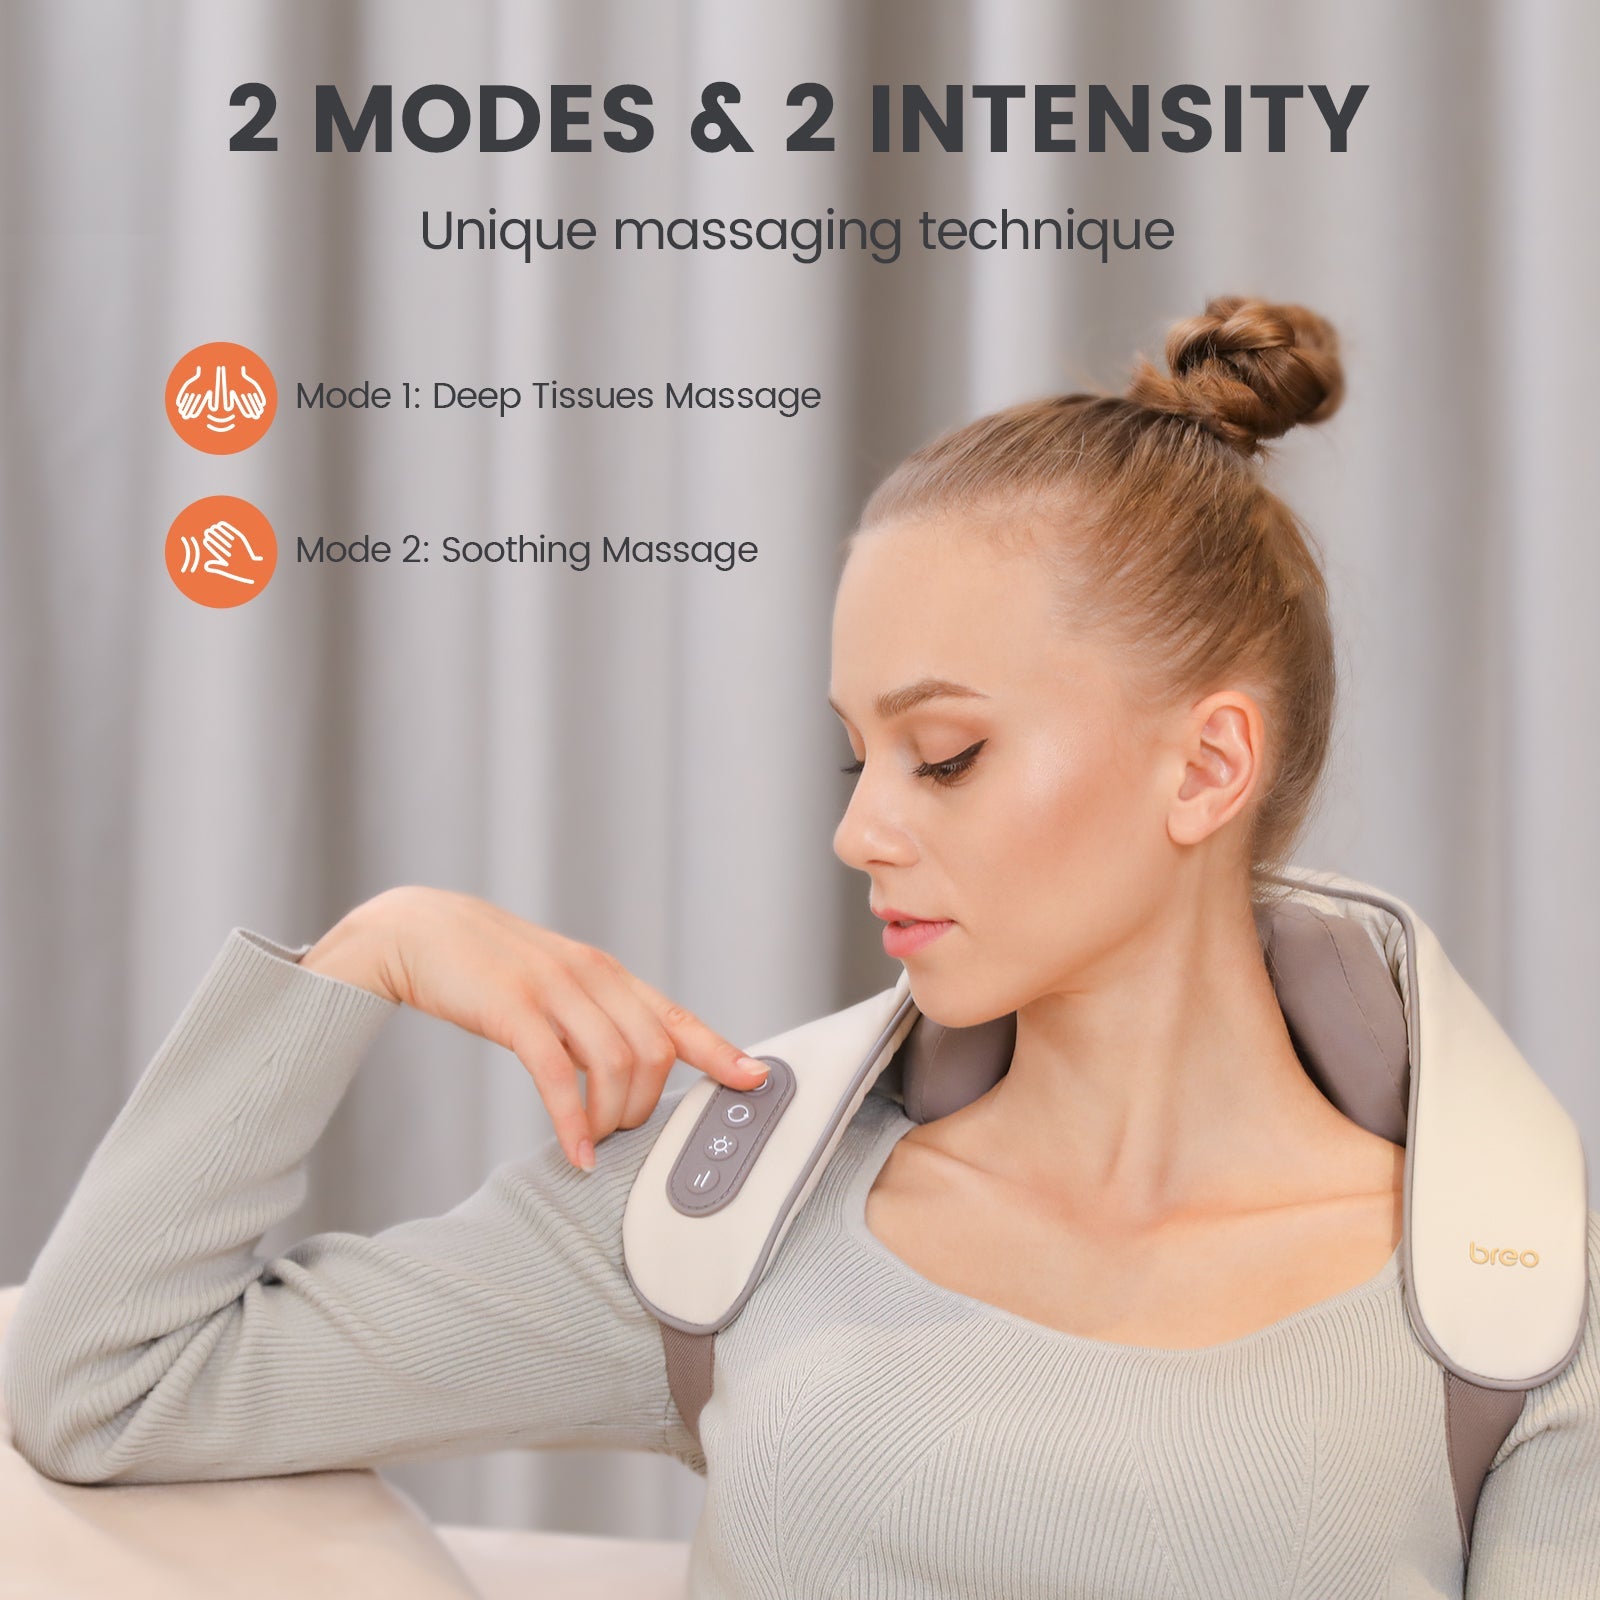 6 Best Neck and Shoulder Massagers to Fight Fatigue - Guiding Tech